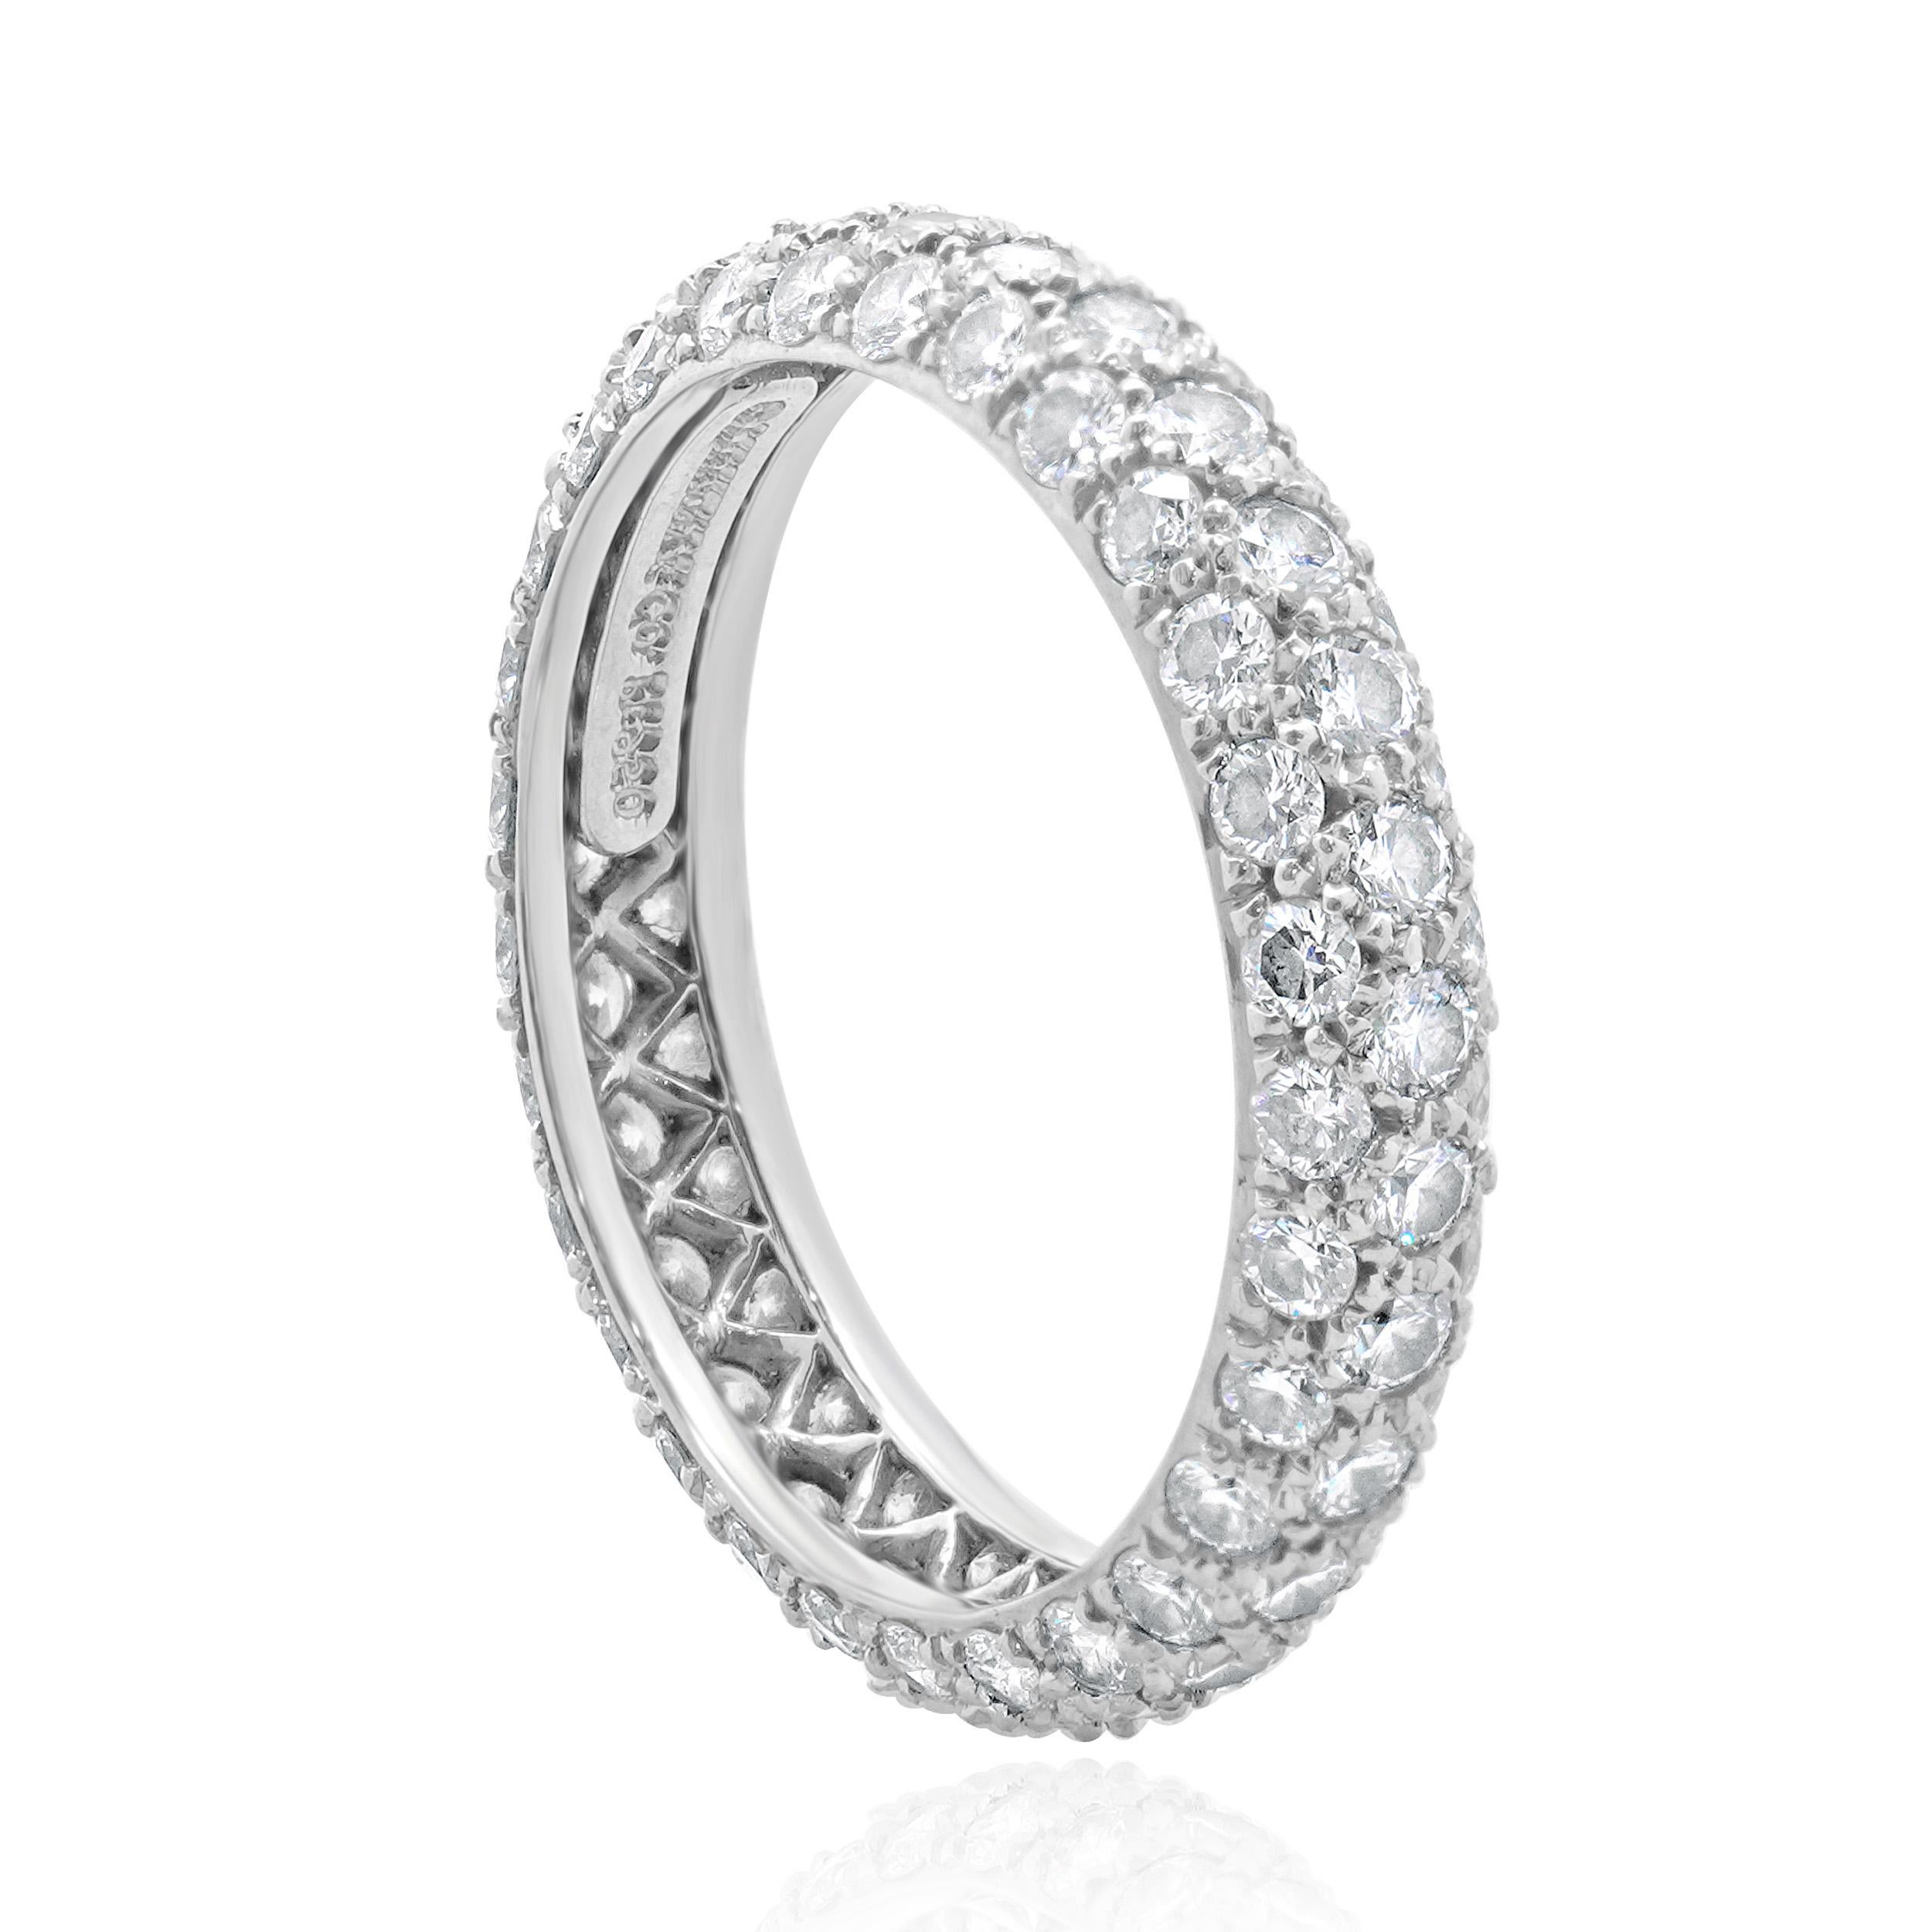 Tiffany & Co. Platinum Pave Diamond Etoile Eternity Band In Excellent Condition For Sale In Scottsdale, AZ